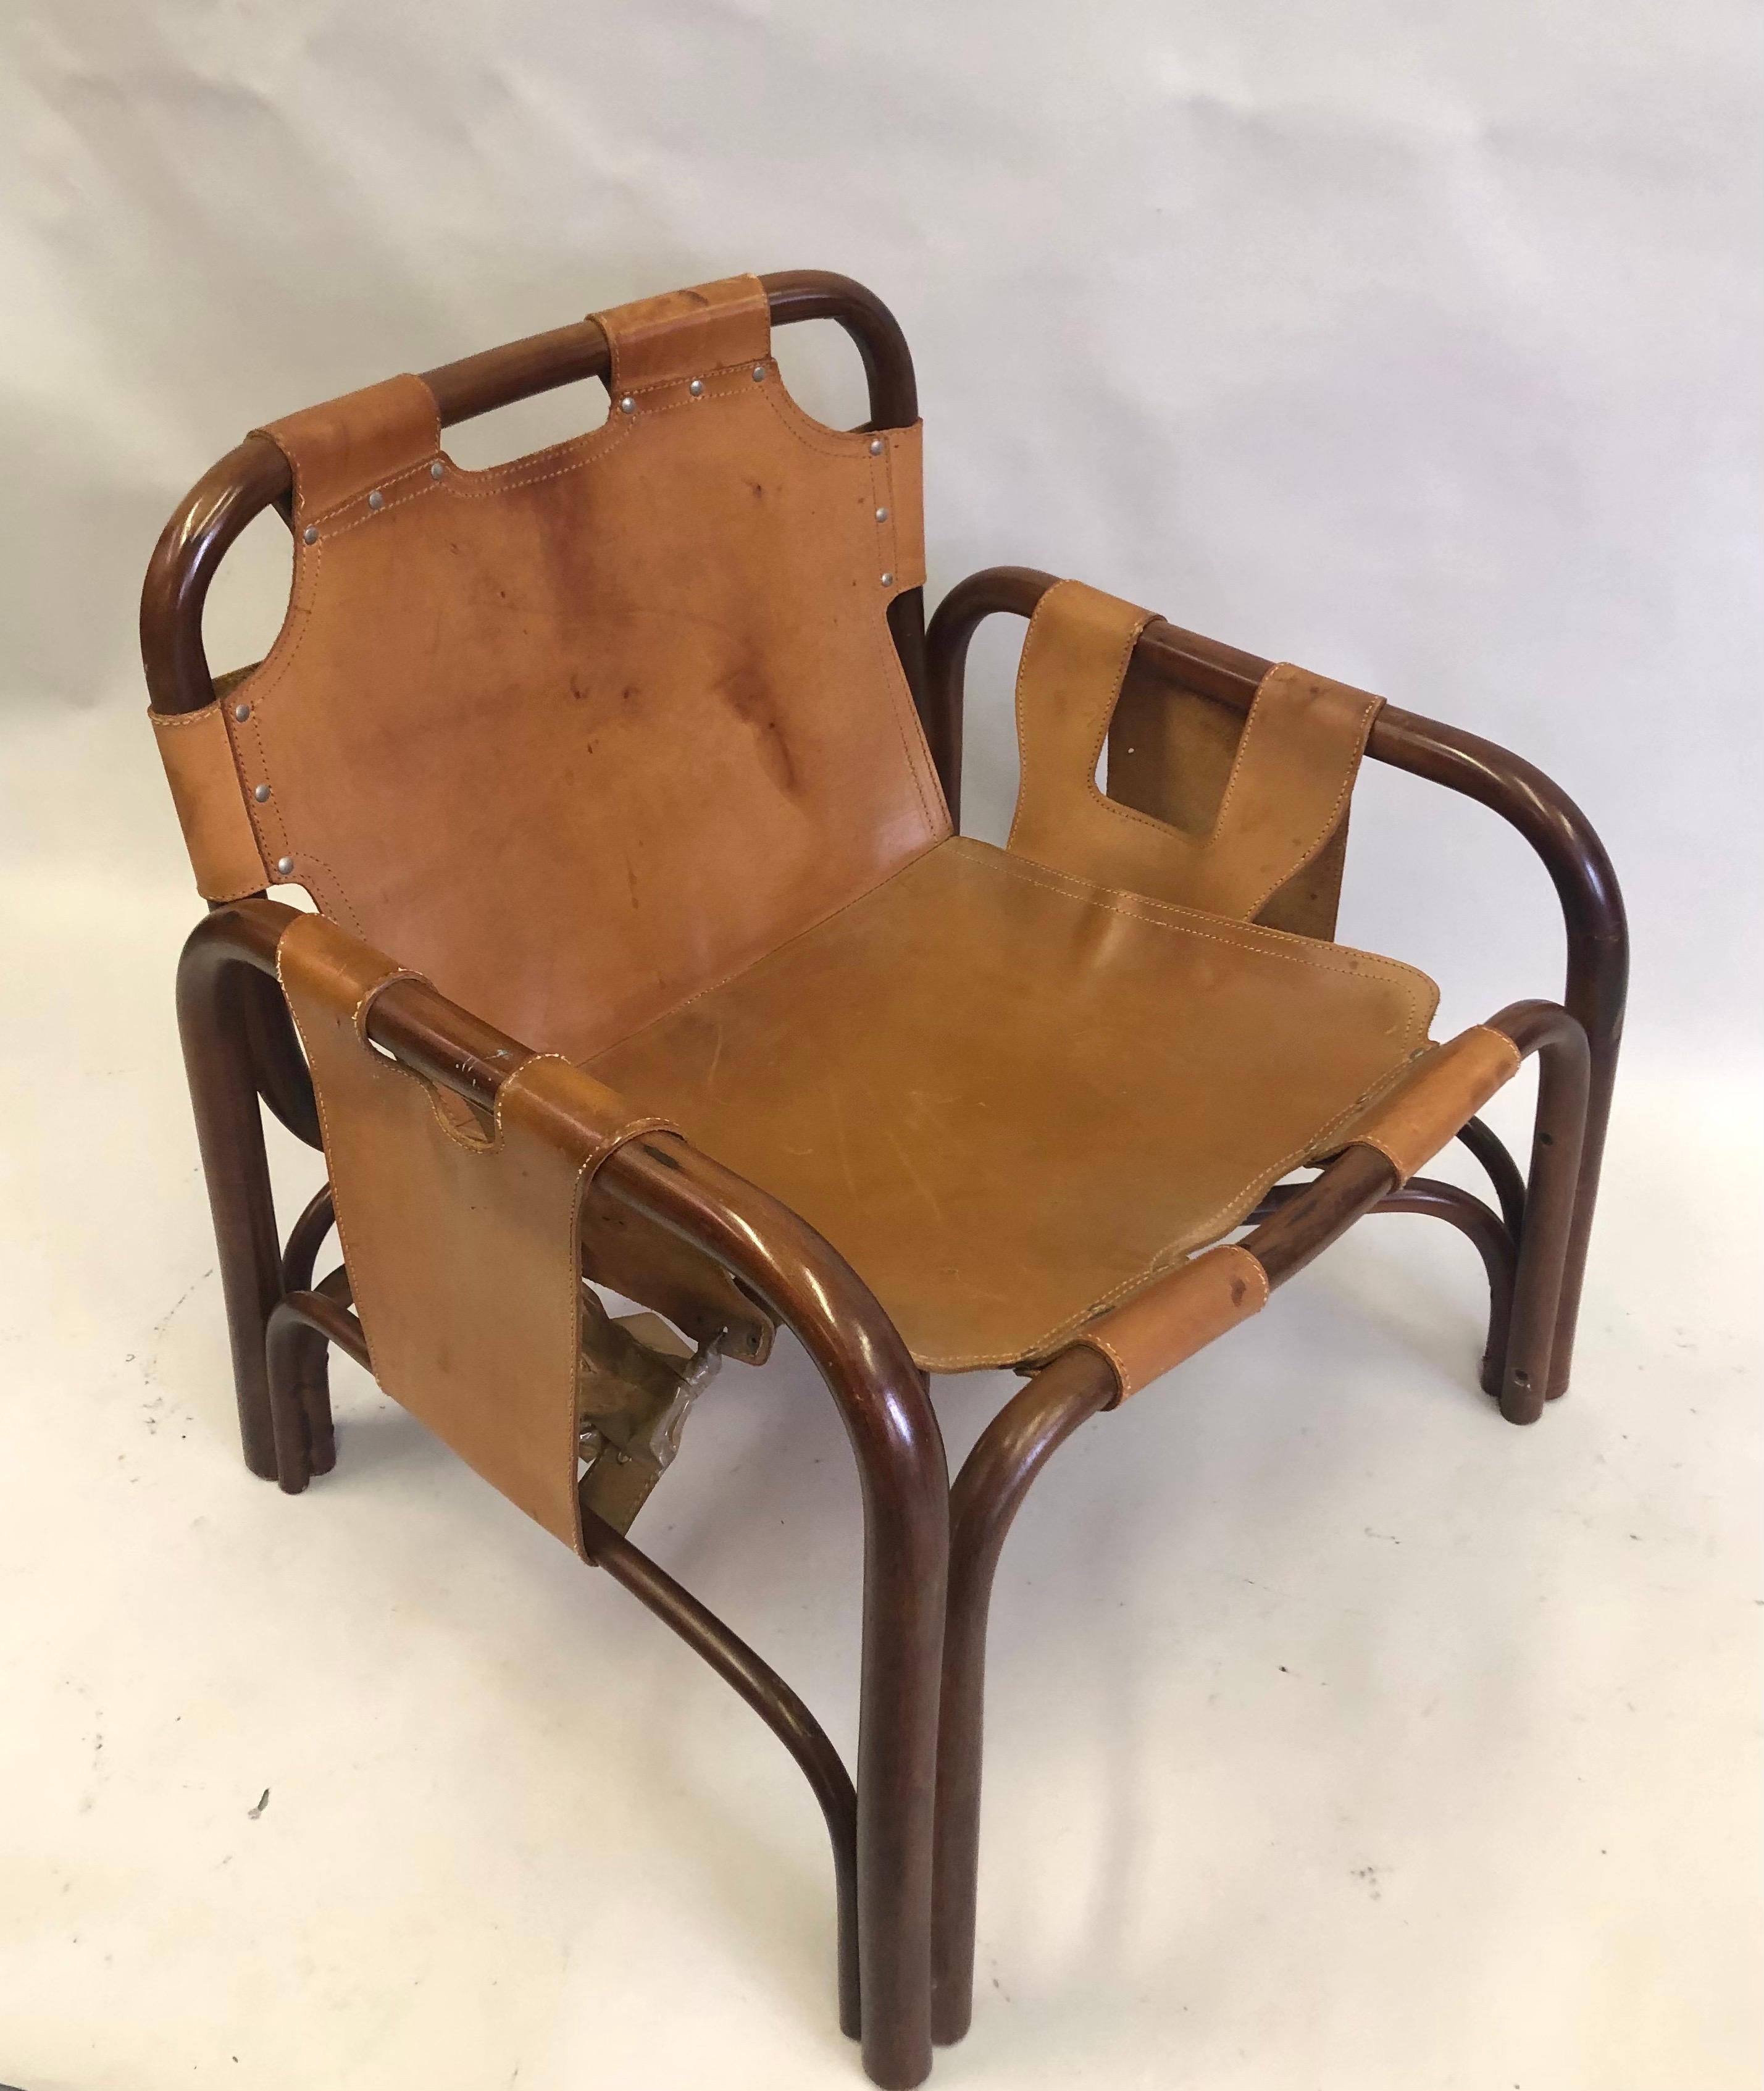 An Elegant Pair of Italian Mid-Century Modern Bamboo, Rattan and hand-Stitched cowhide leather lounge chairs in the style of the French master, Jacques Adnet and Hermes. The chairs are constructed on a bamboo and rattan frame and luxuriously covered